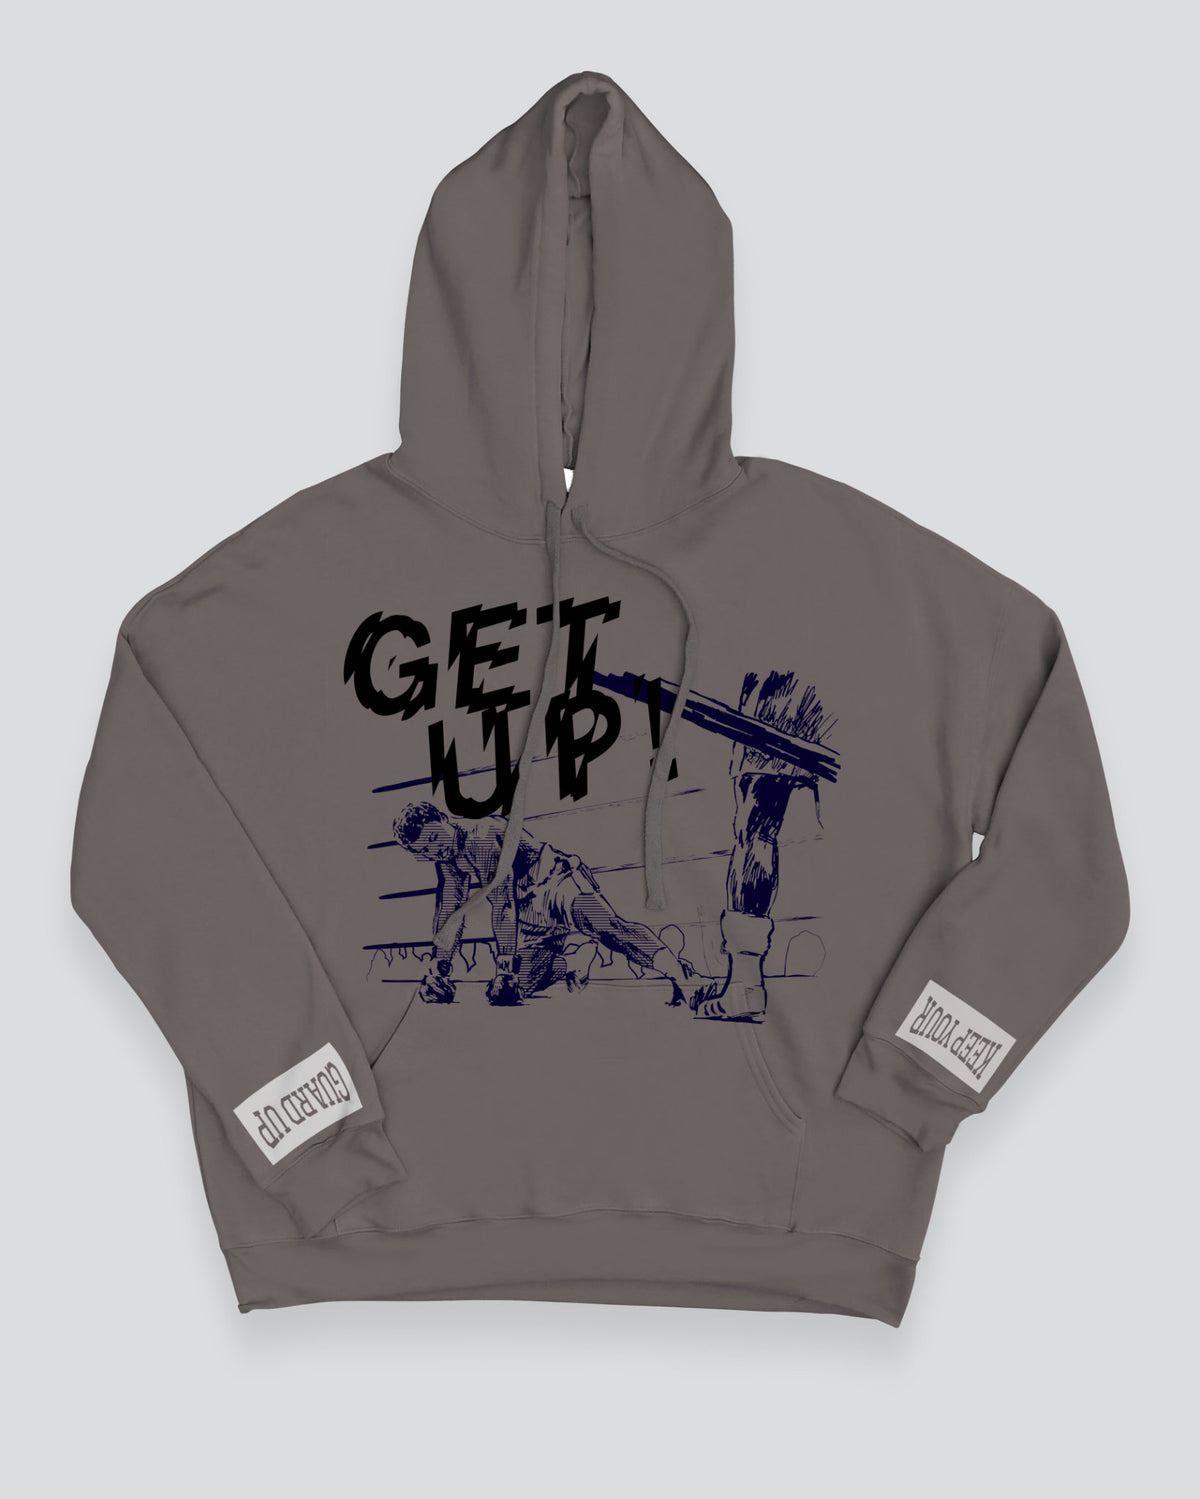 GET UP! Training Camp Boxing Hoody